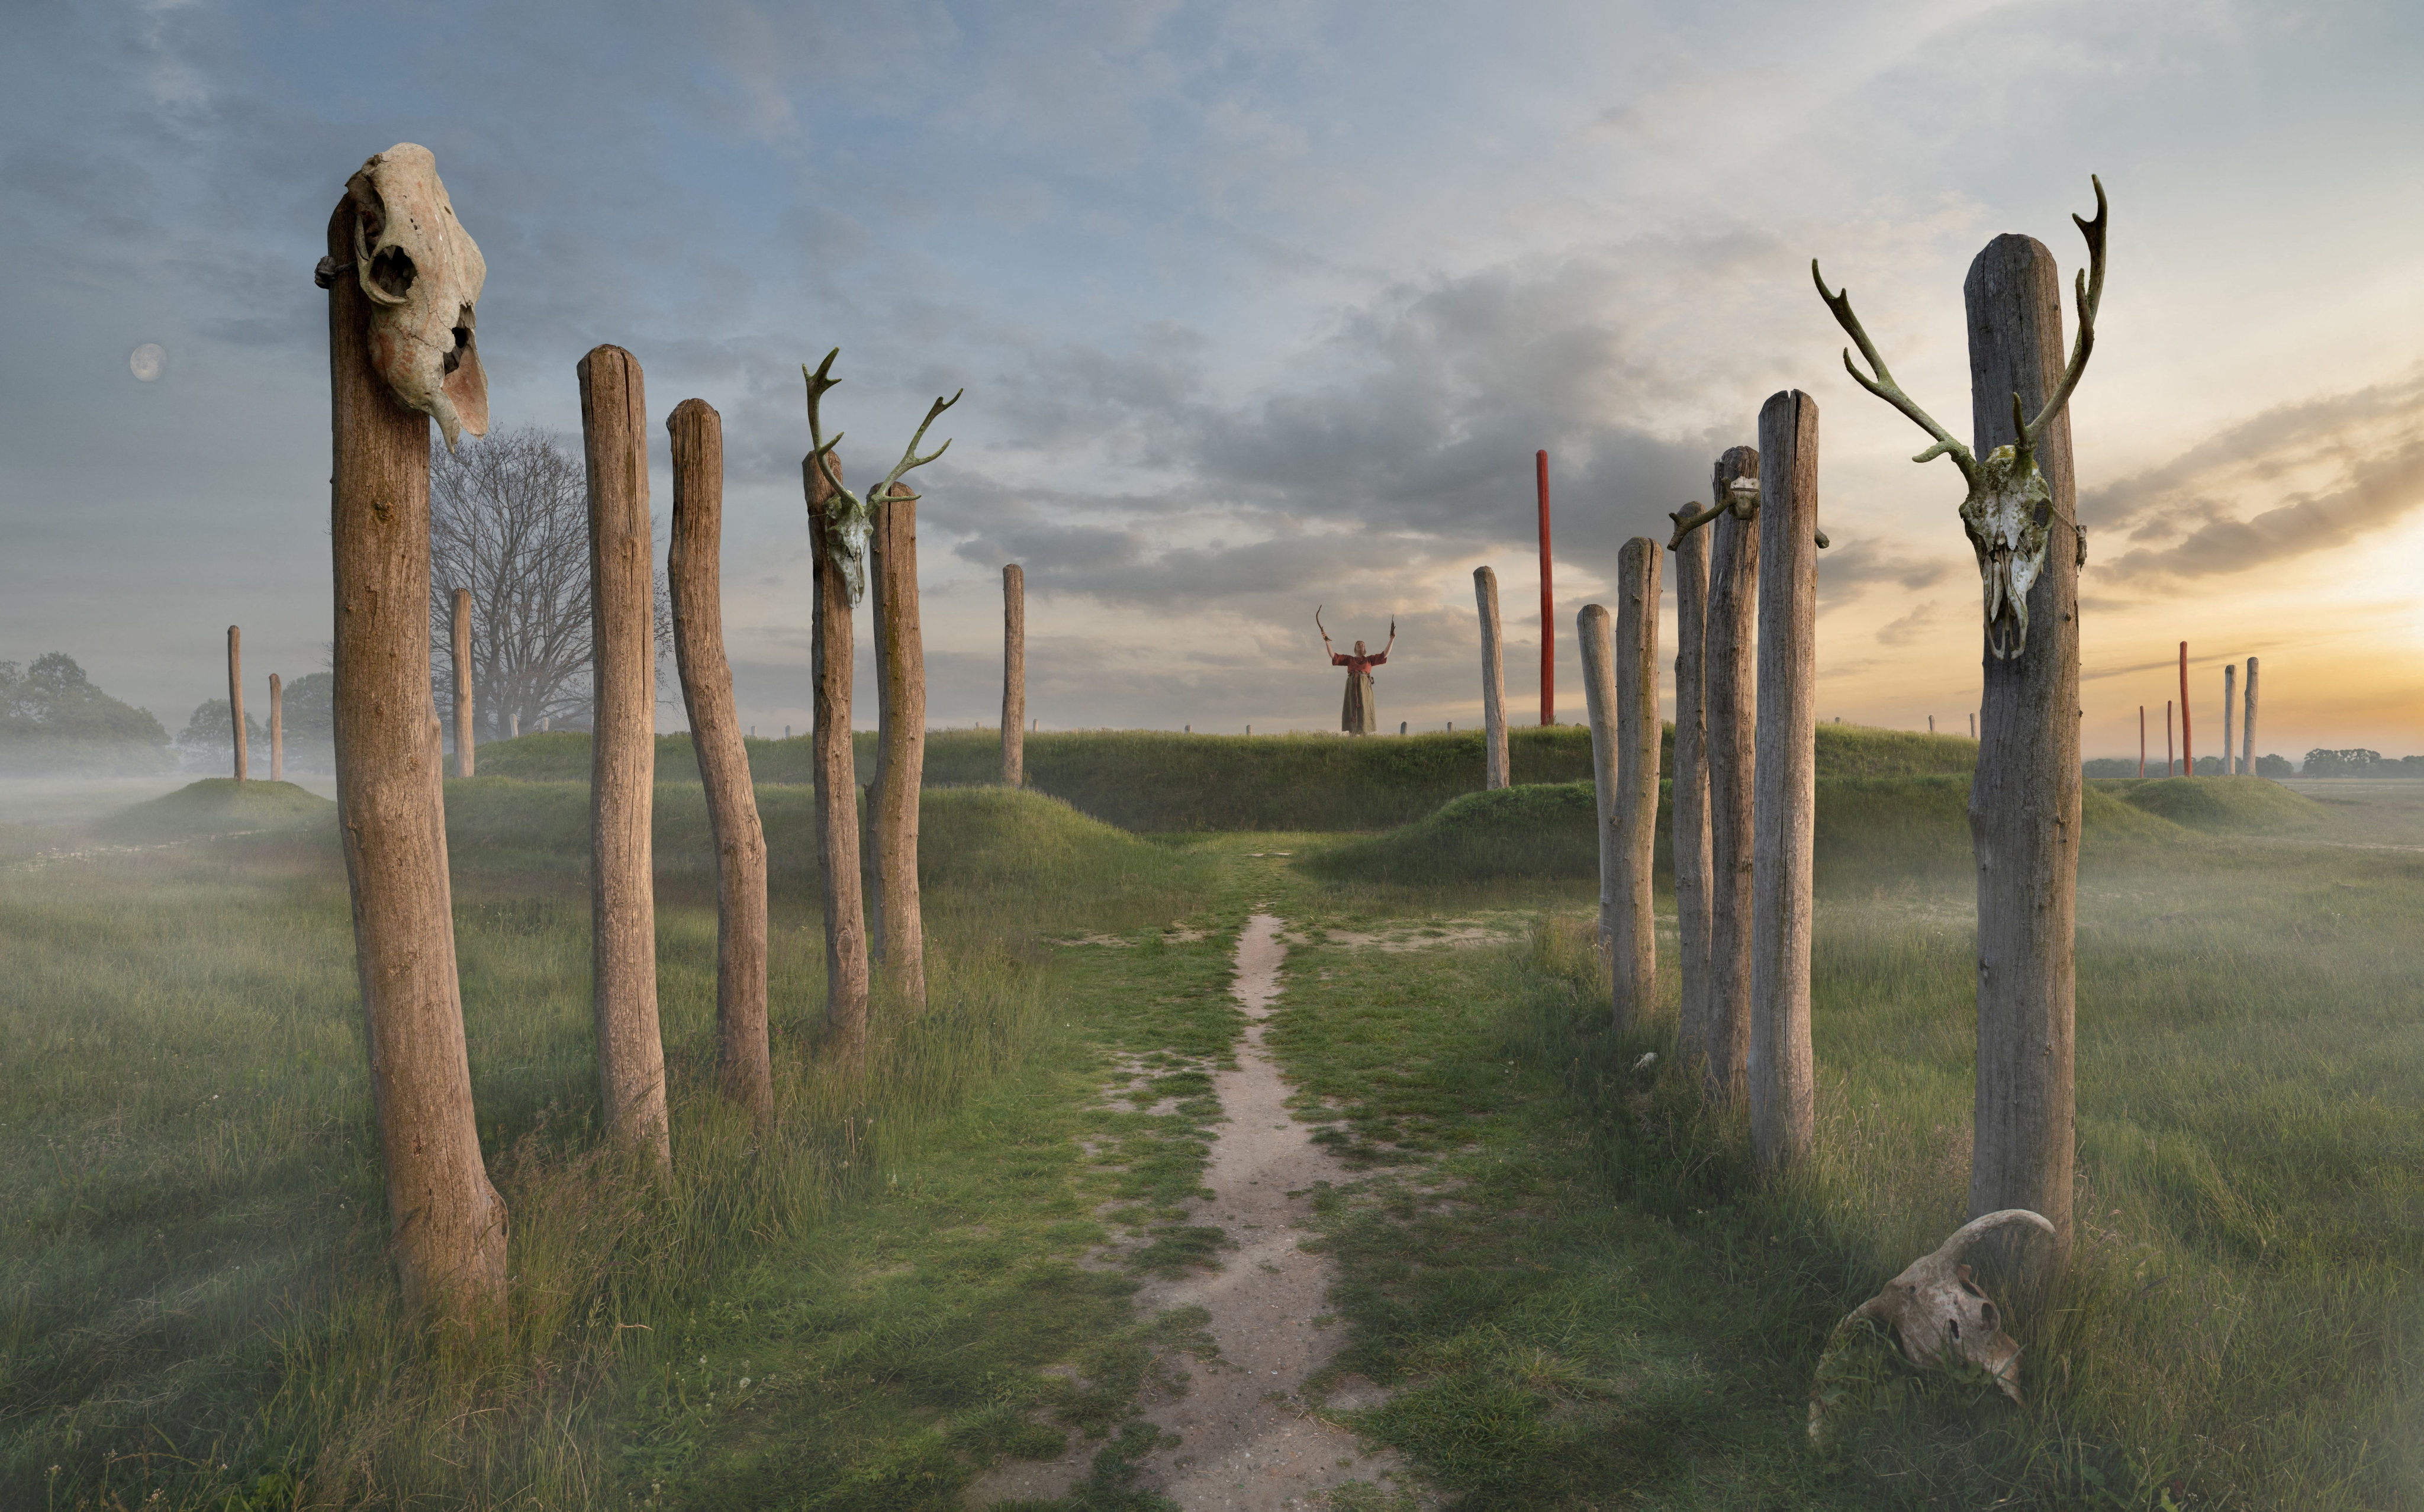 The Stonehenge-like site found in the Dutch town of Tiel is depicted in an artist’s illustration. Image: Municipality of Tiel via Reuters